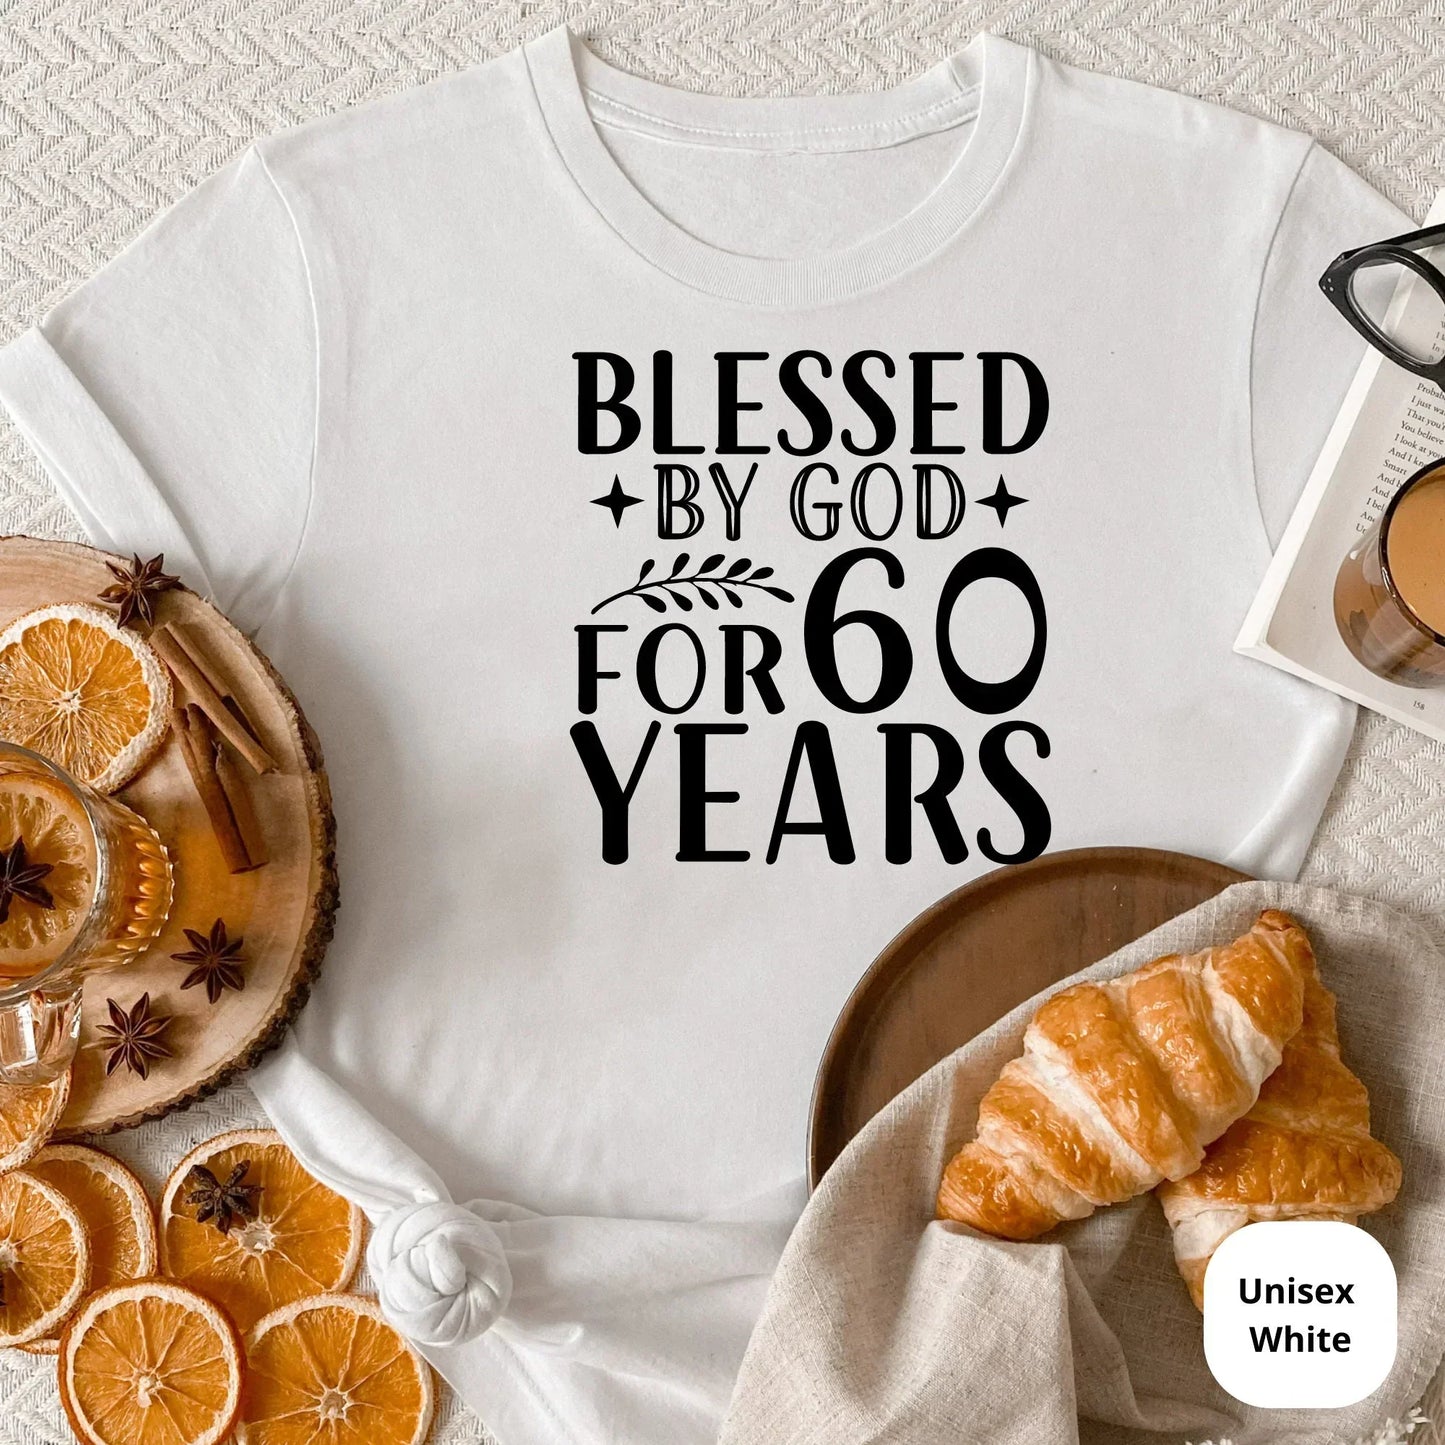 60th Birthday Shirt, 60th Birthday Gifts, Bless by God 60 Years